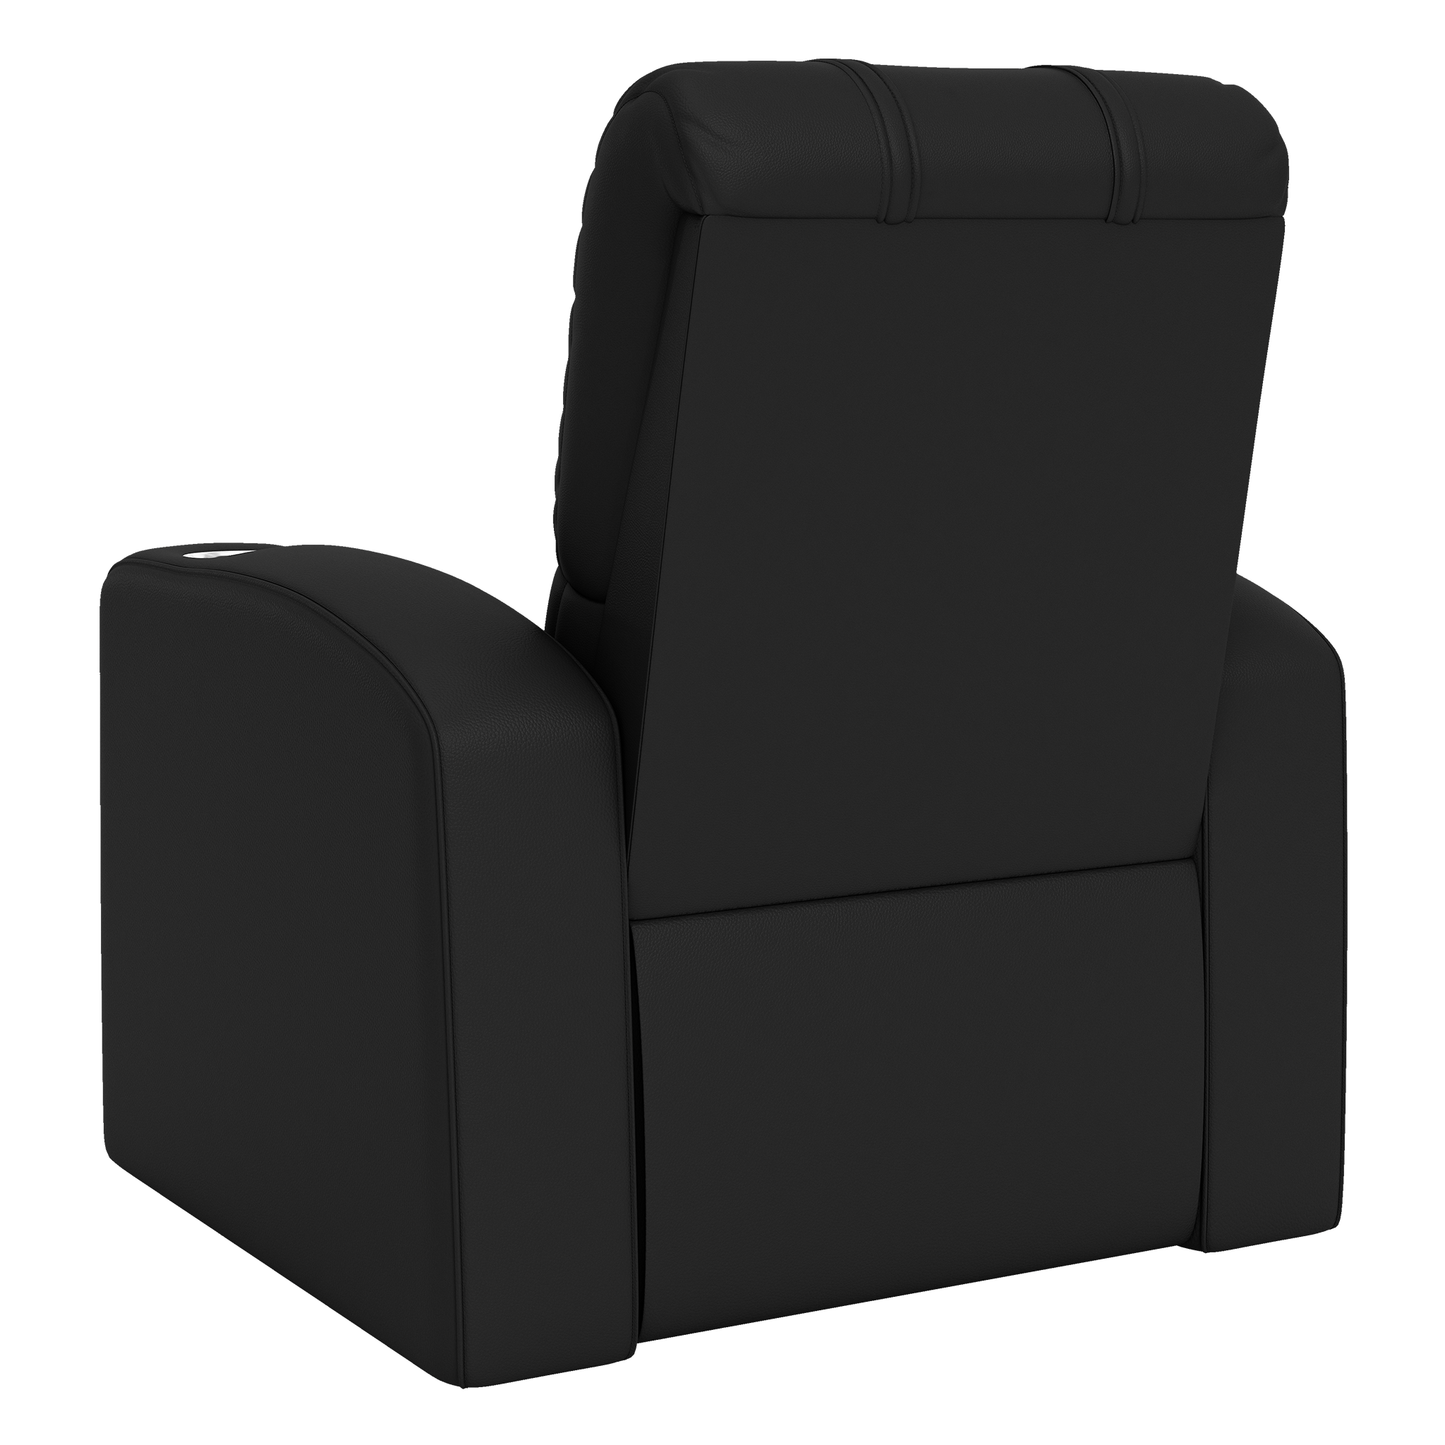 Relax Home Theater Recliner with Denver Nuggets Logo